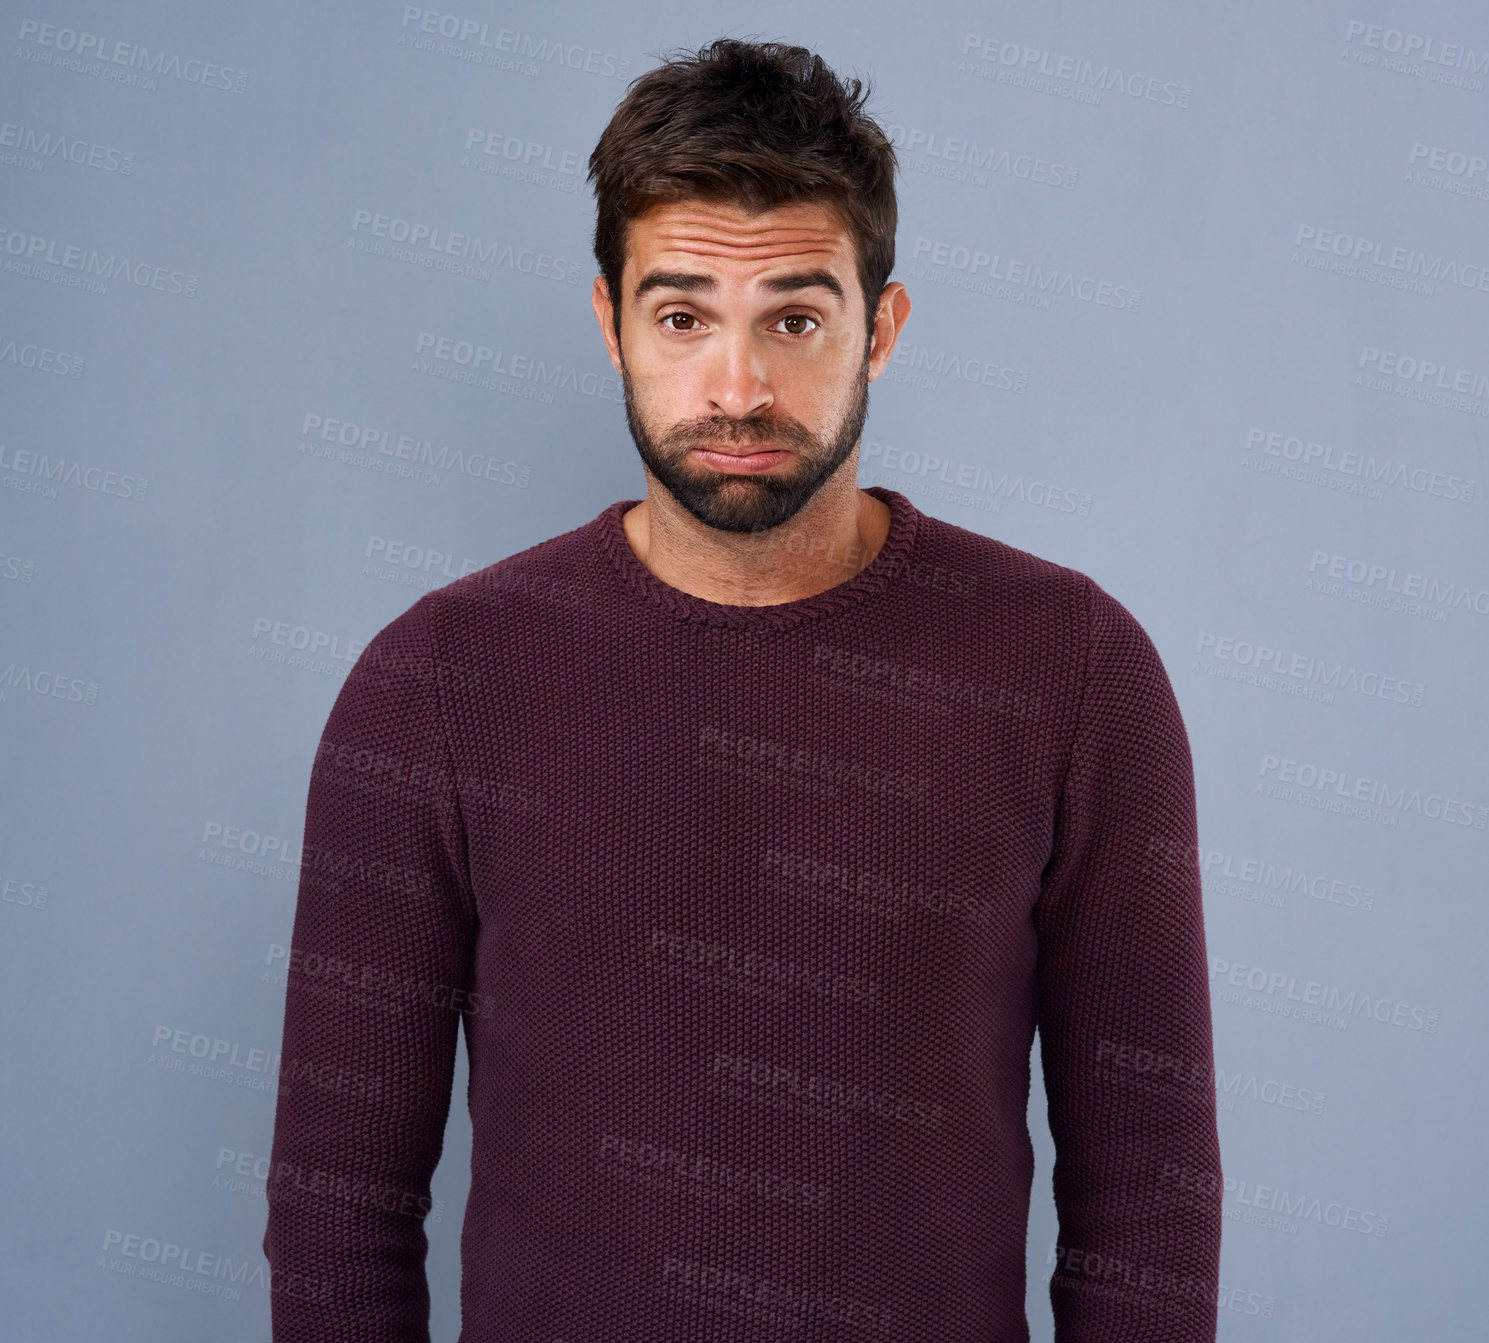 Buy stock photo Studio shot of a handsome young man looking uncomfortable against a gray background